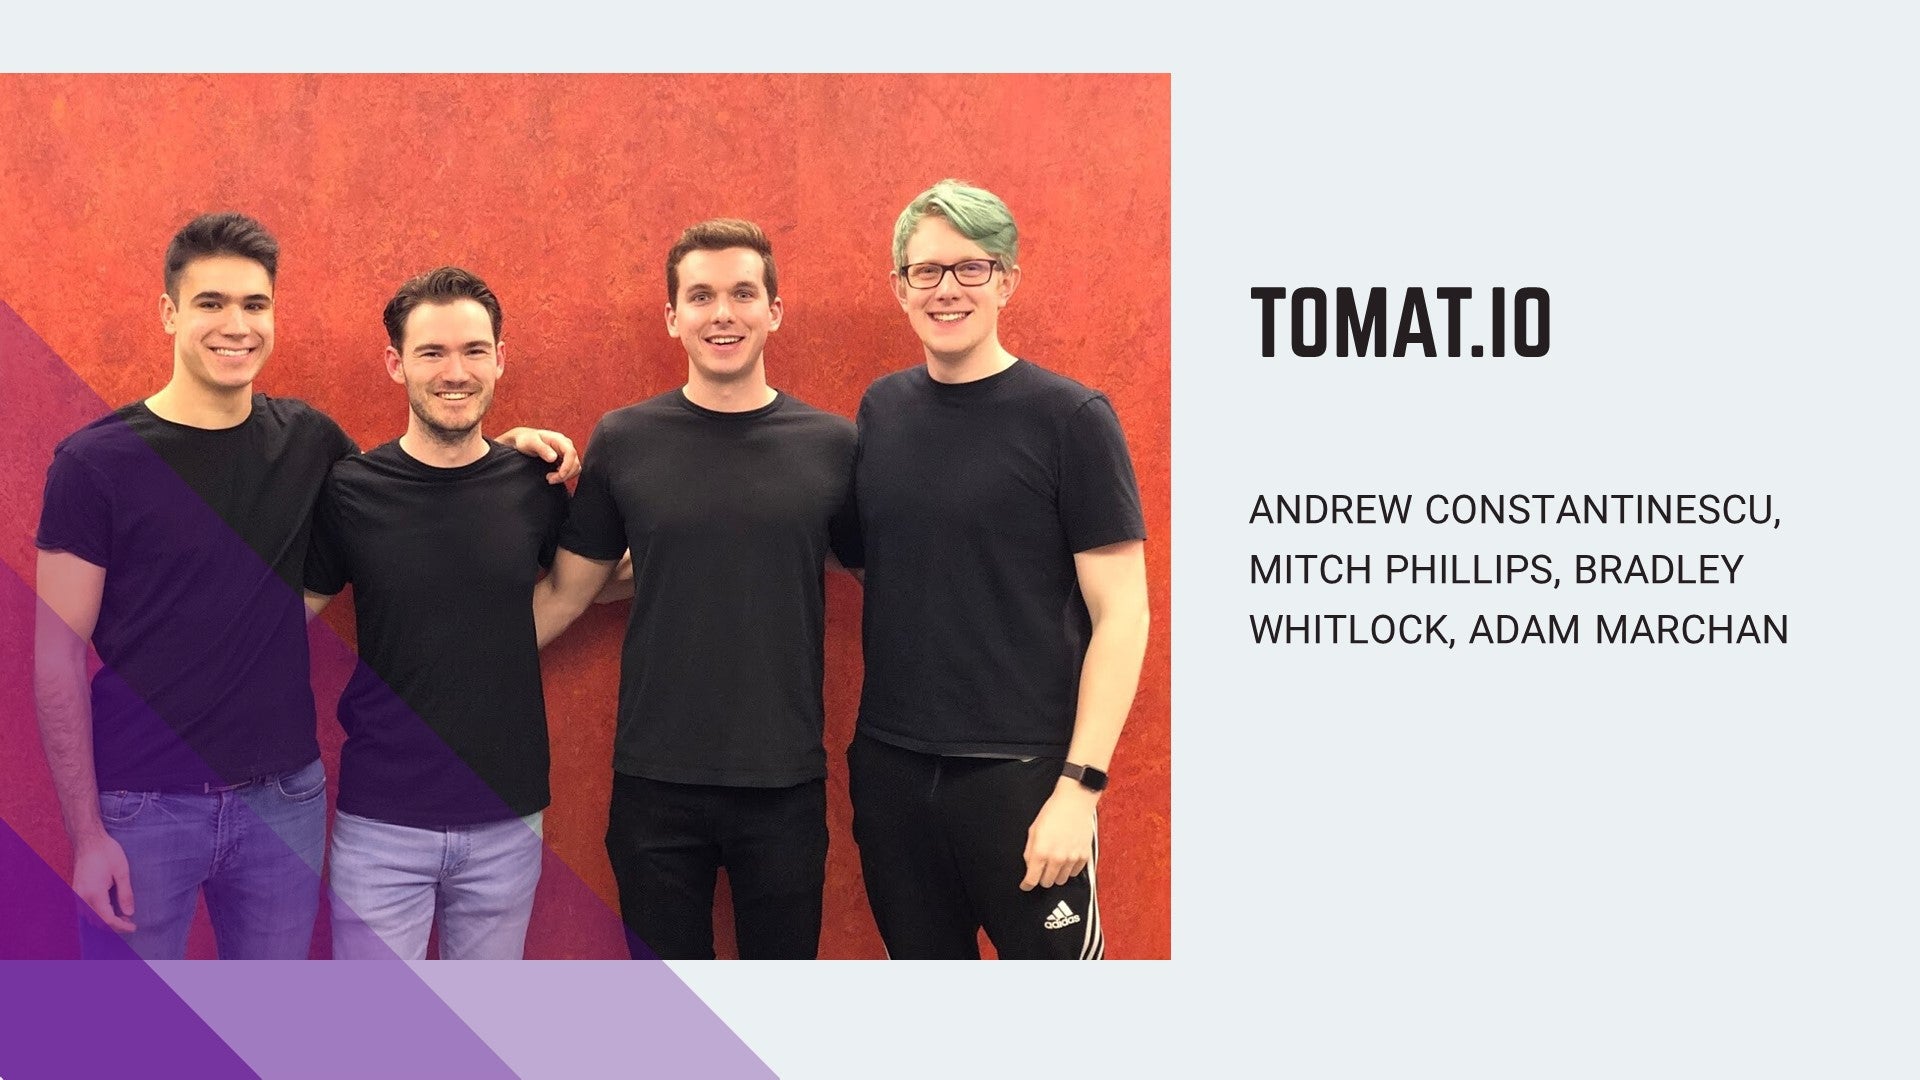 TOMAT.IO is working on the future of agriculture by building a tomato harvesting robot for greenhouses.